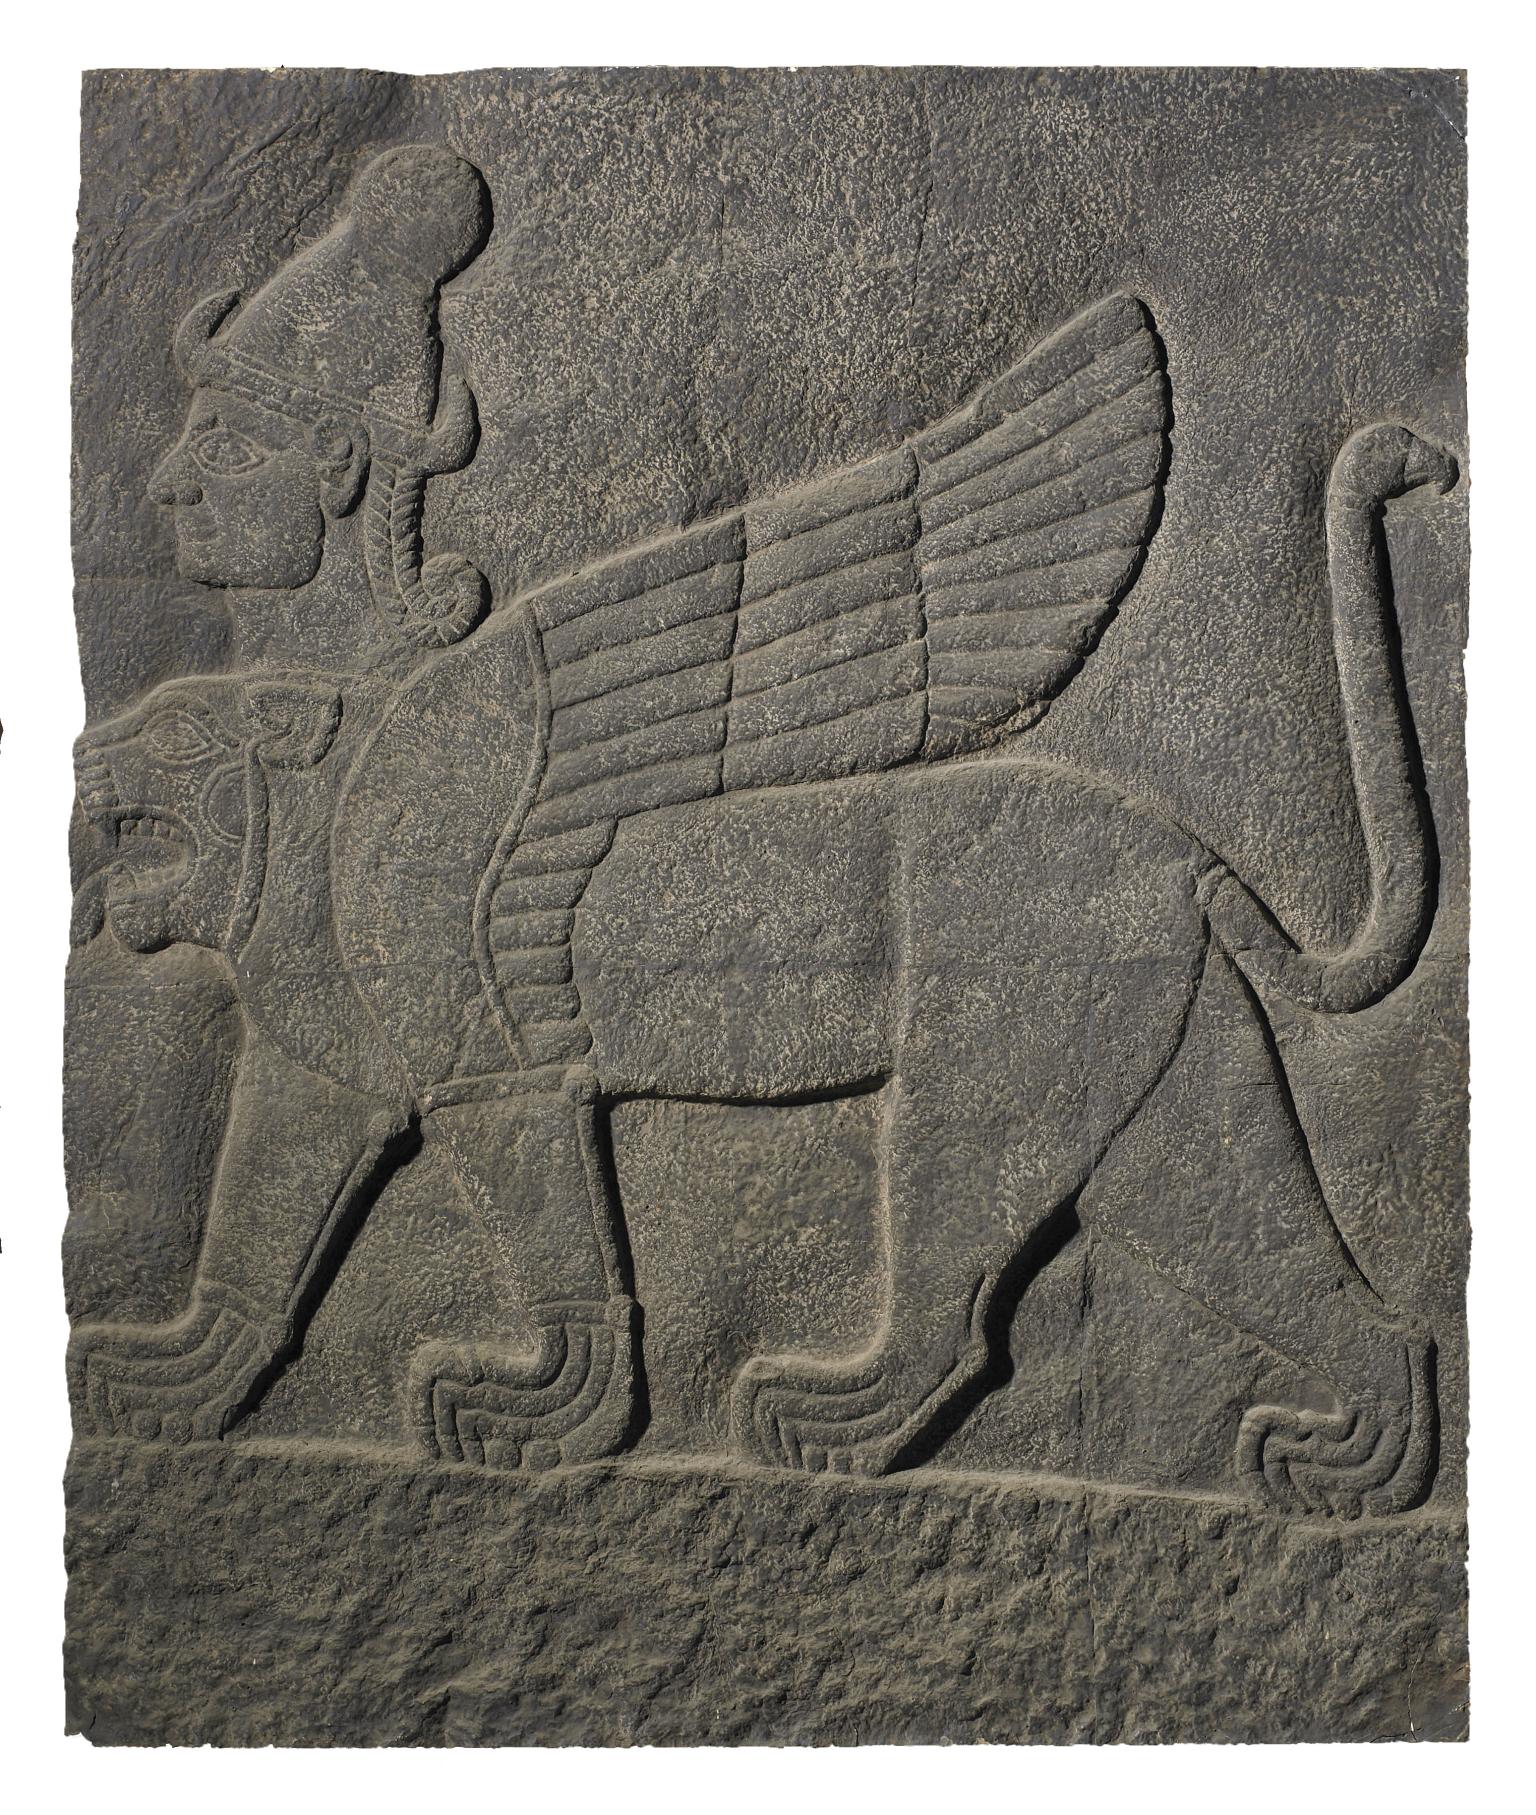 Stone relief of winged lion-like figure with extra head wearing headdress.